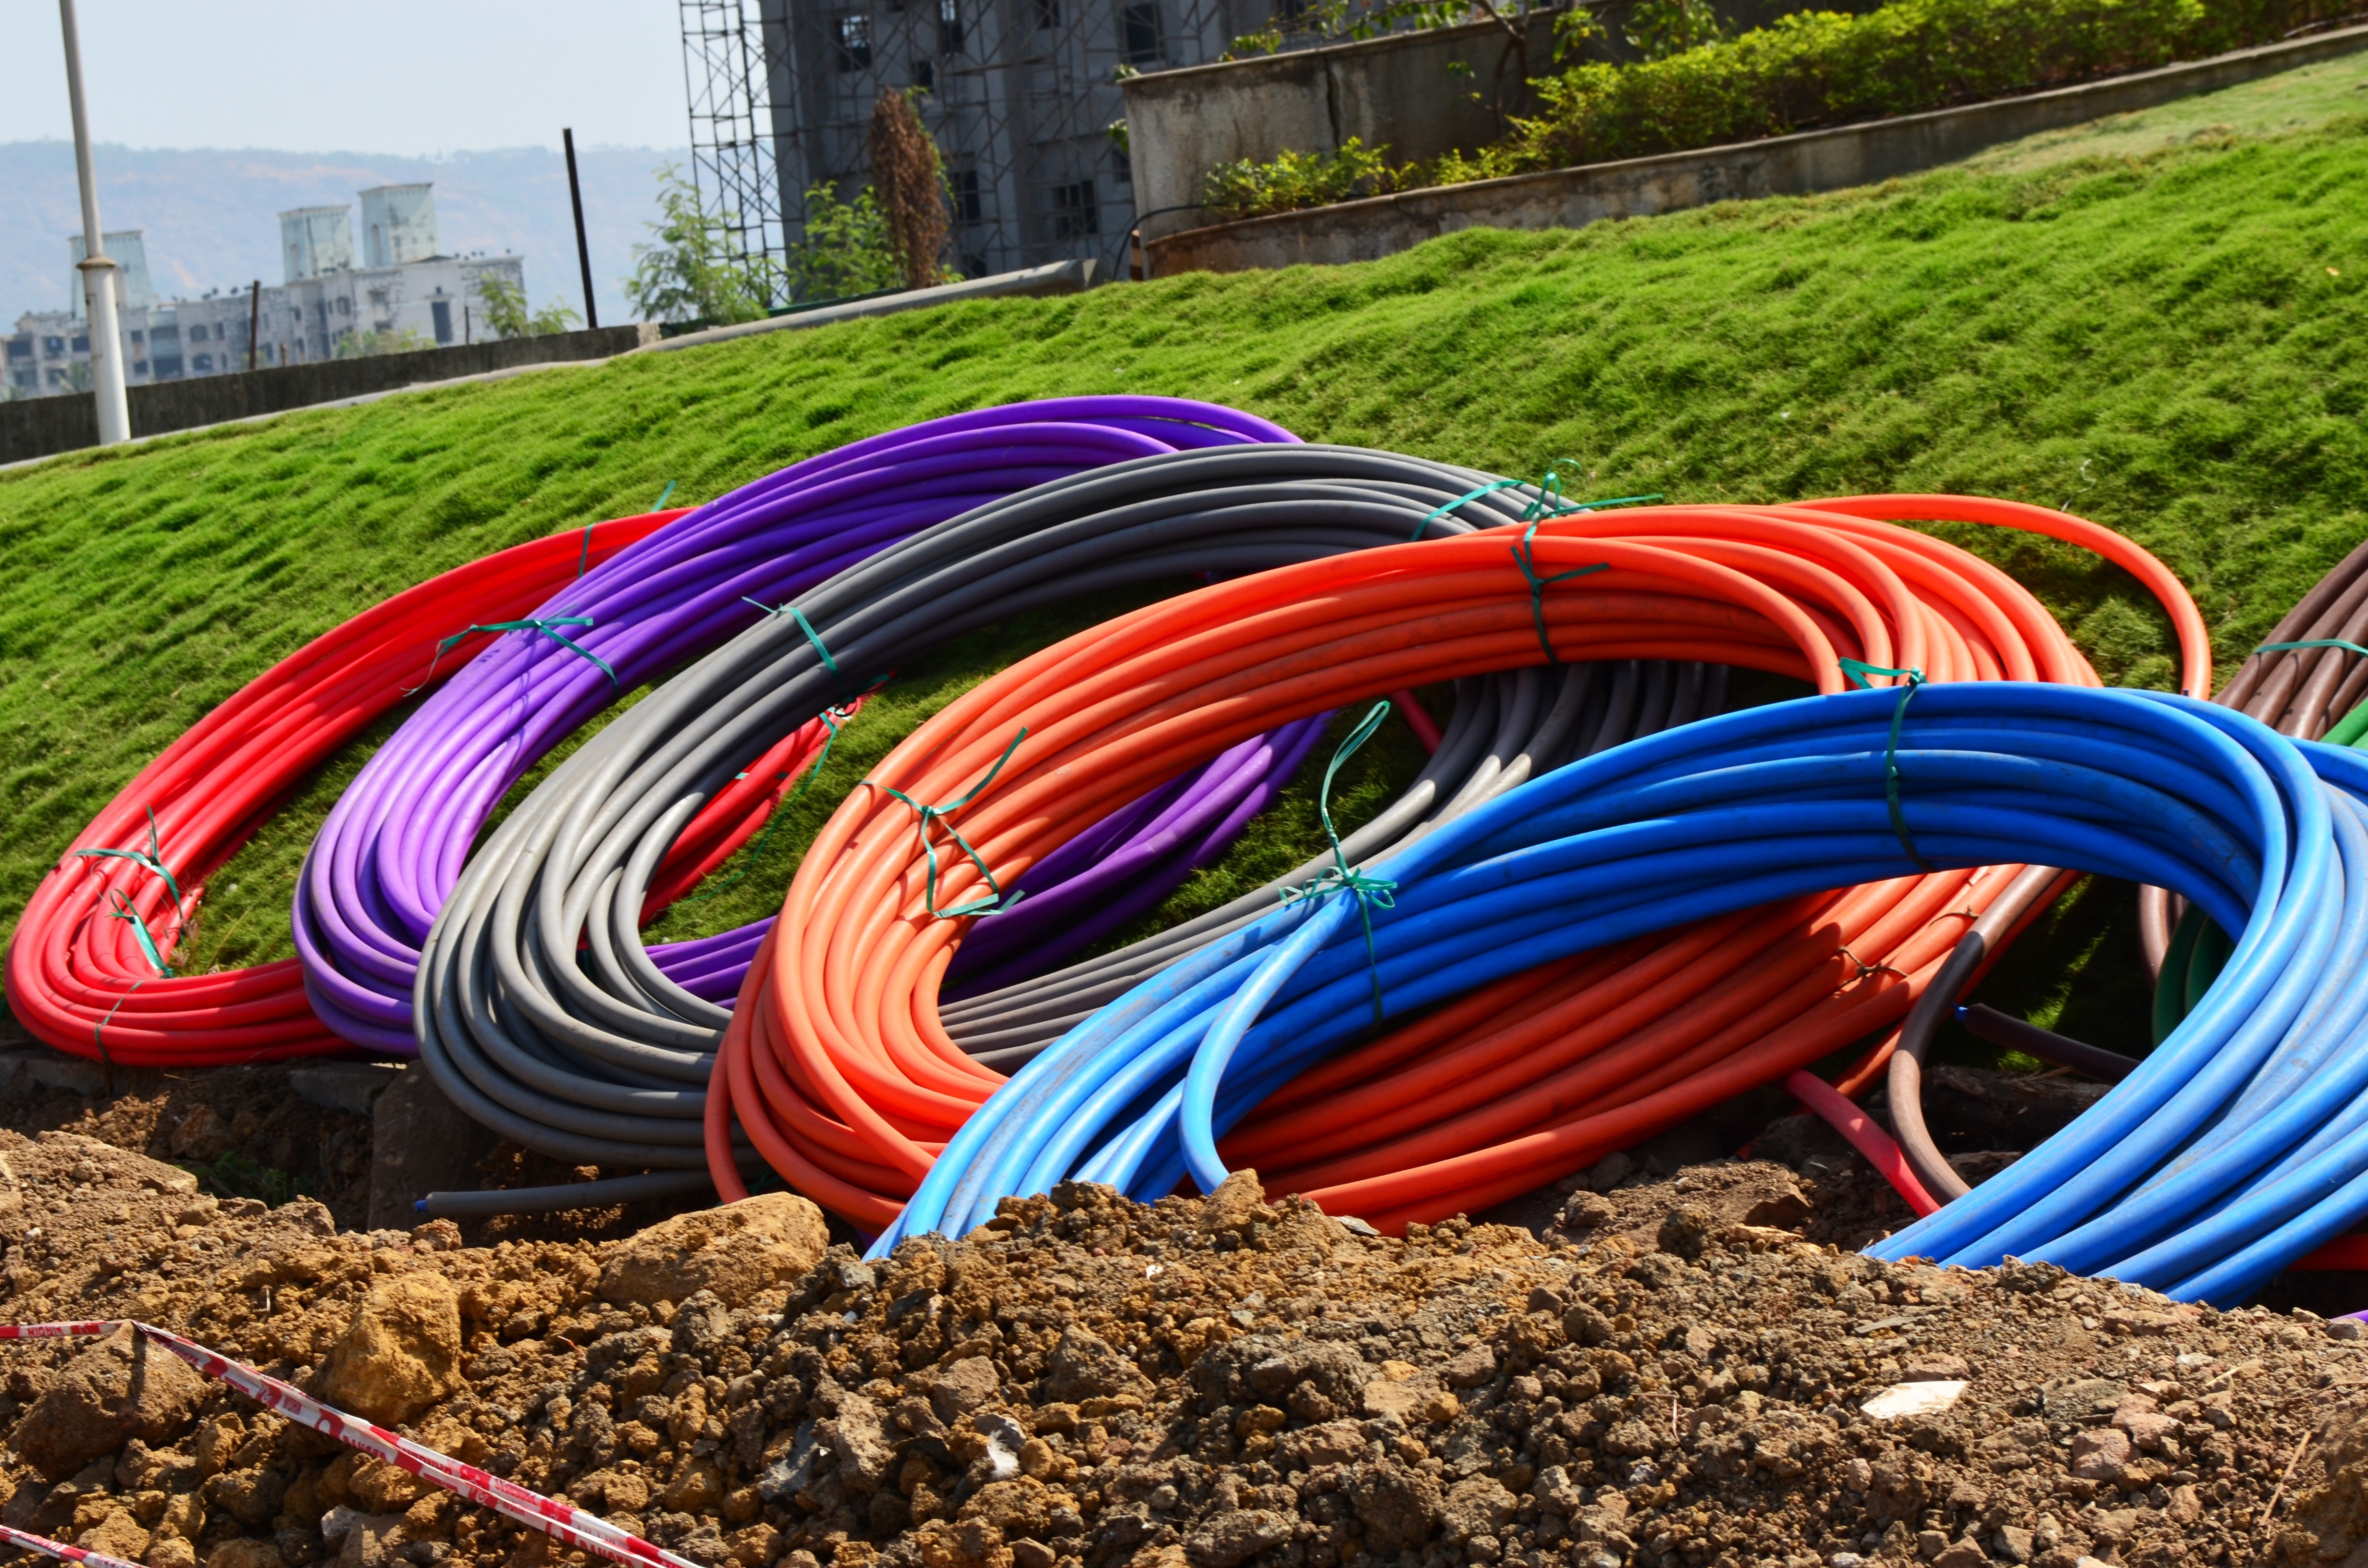 five red, purple, gray, orange, and blue hoses